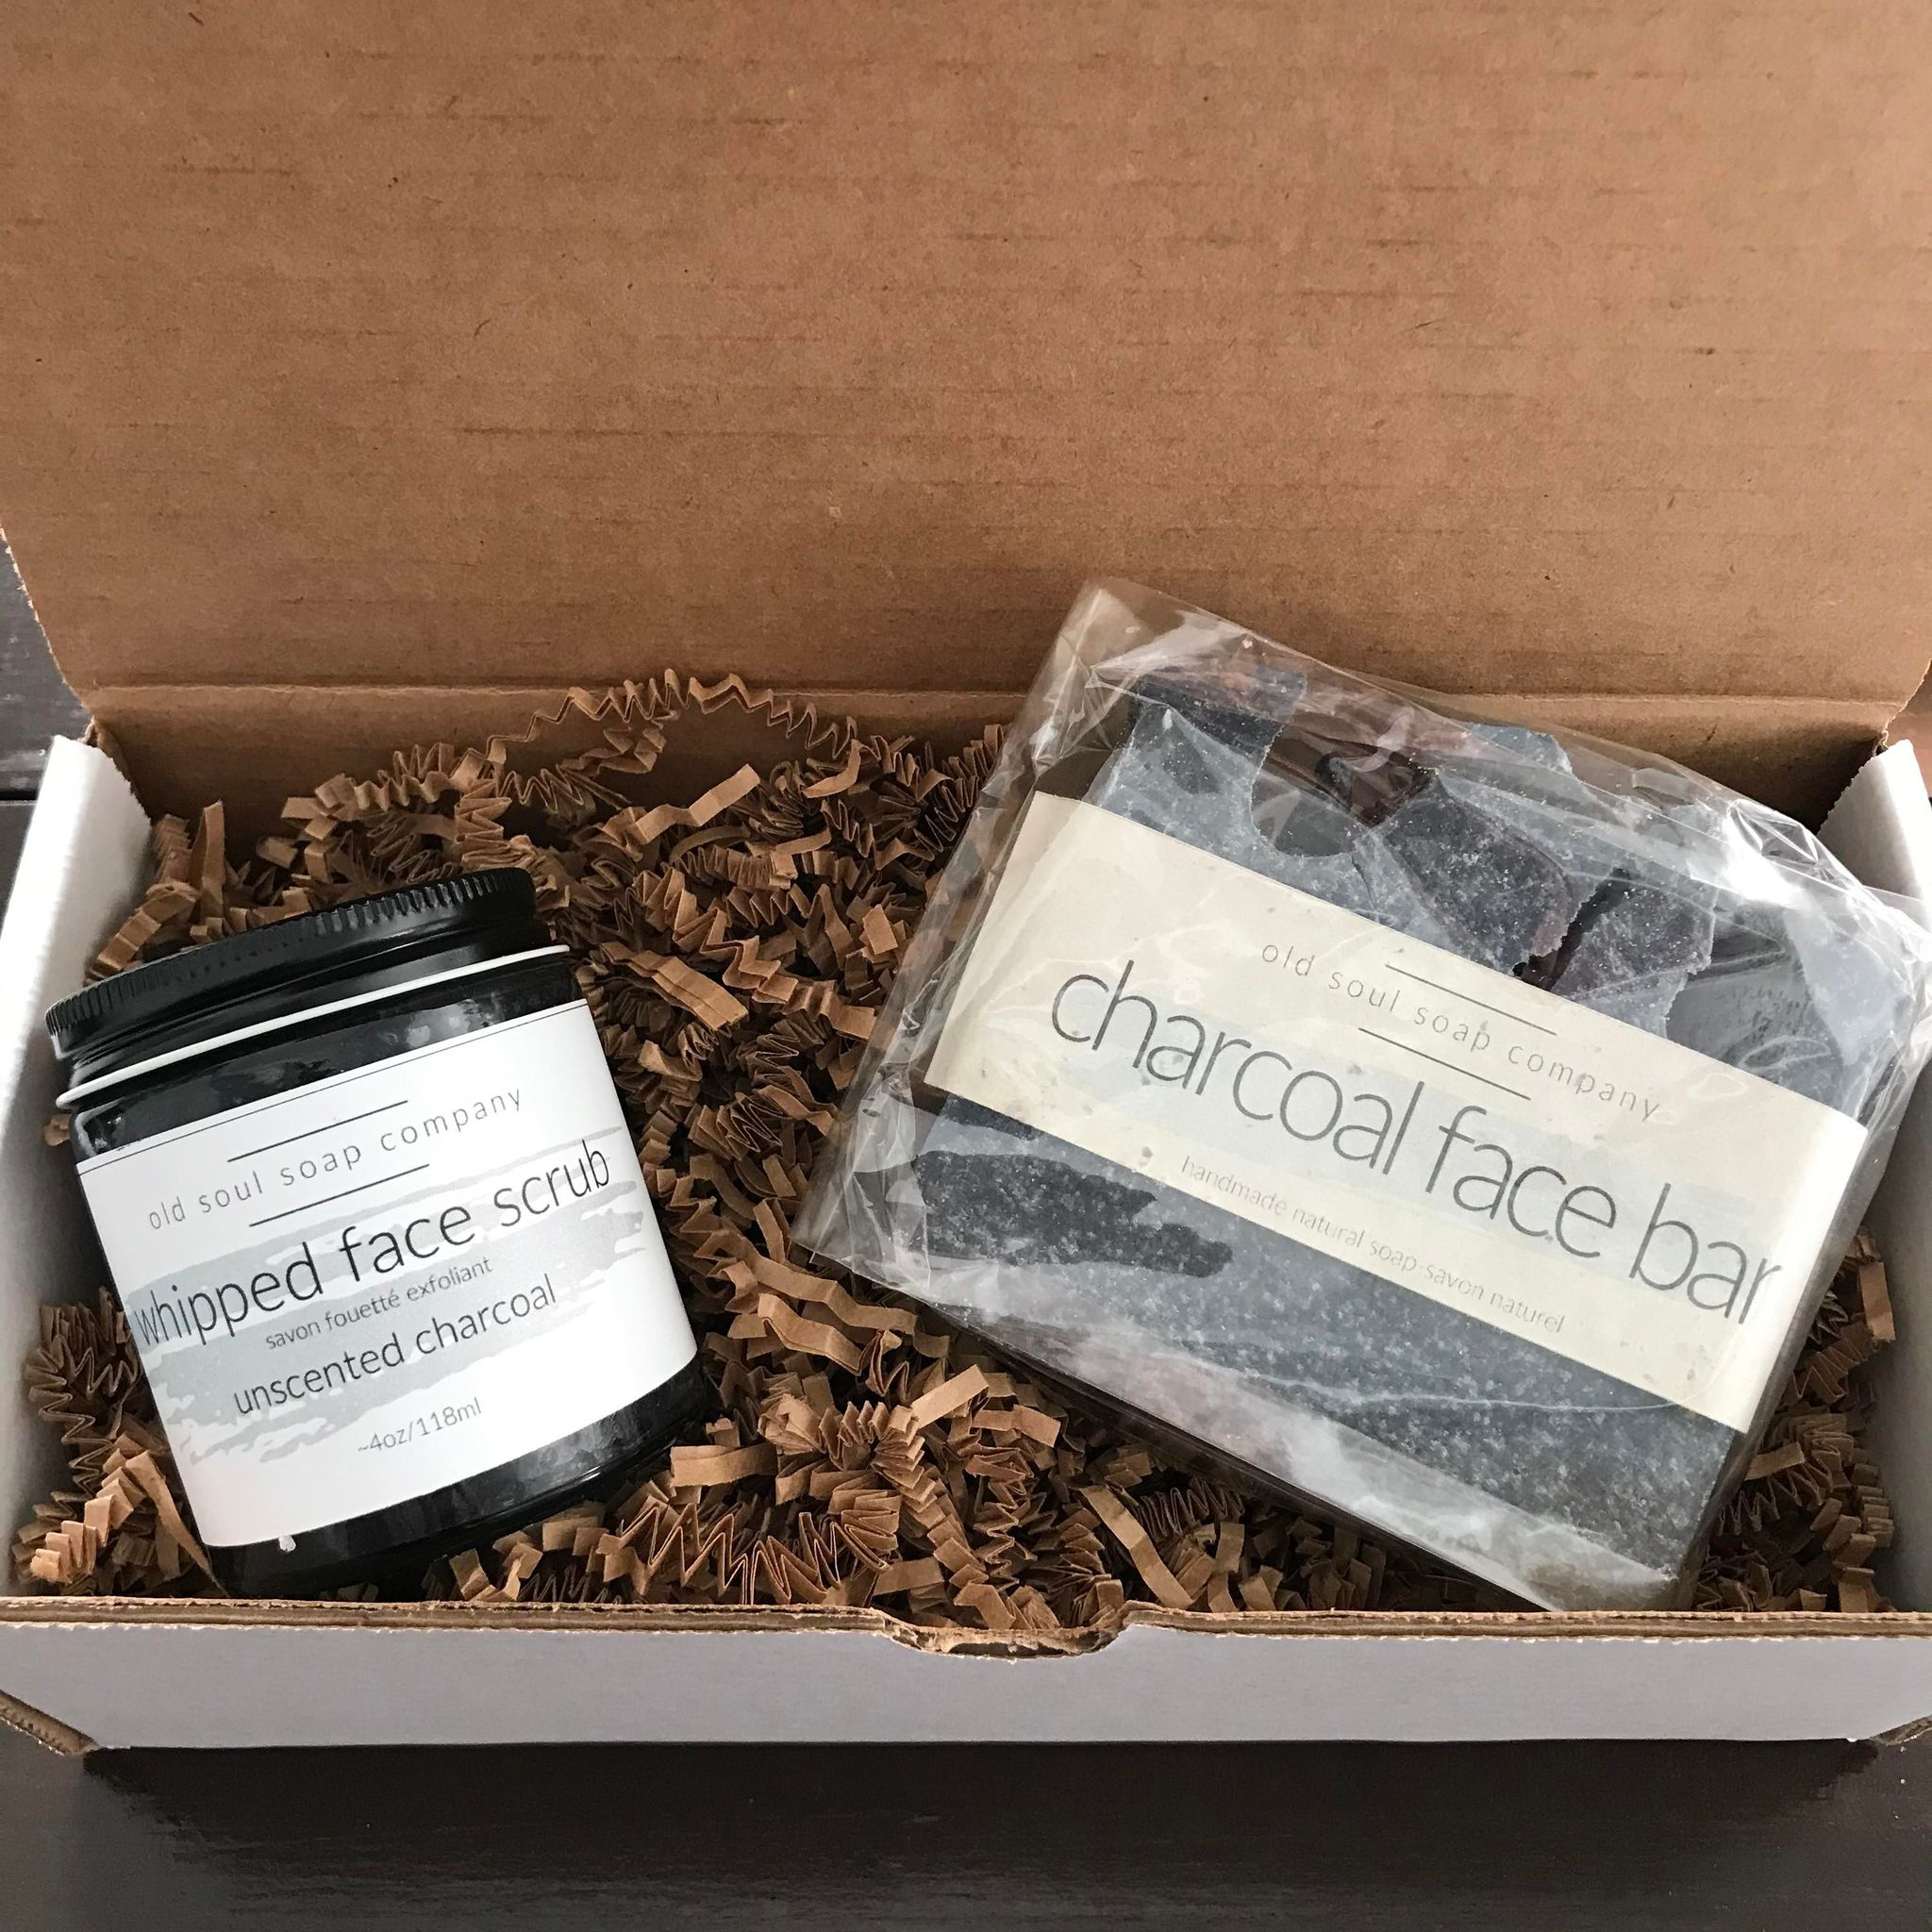 natural facial care kit made in canada by the old soul soap company features a unscented charcoal whipped face scrub in a 4 oz glass jar and a charcoal face bar in a gift box 